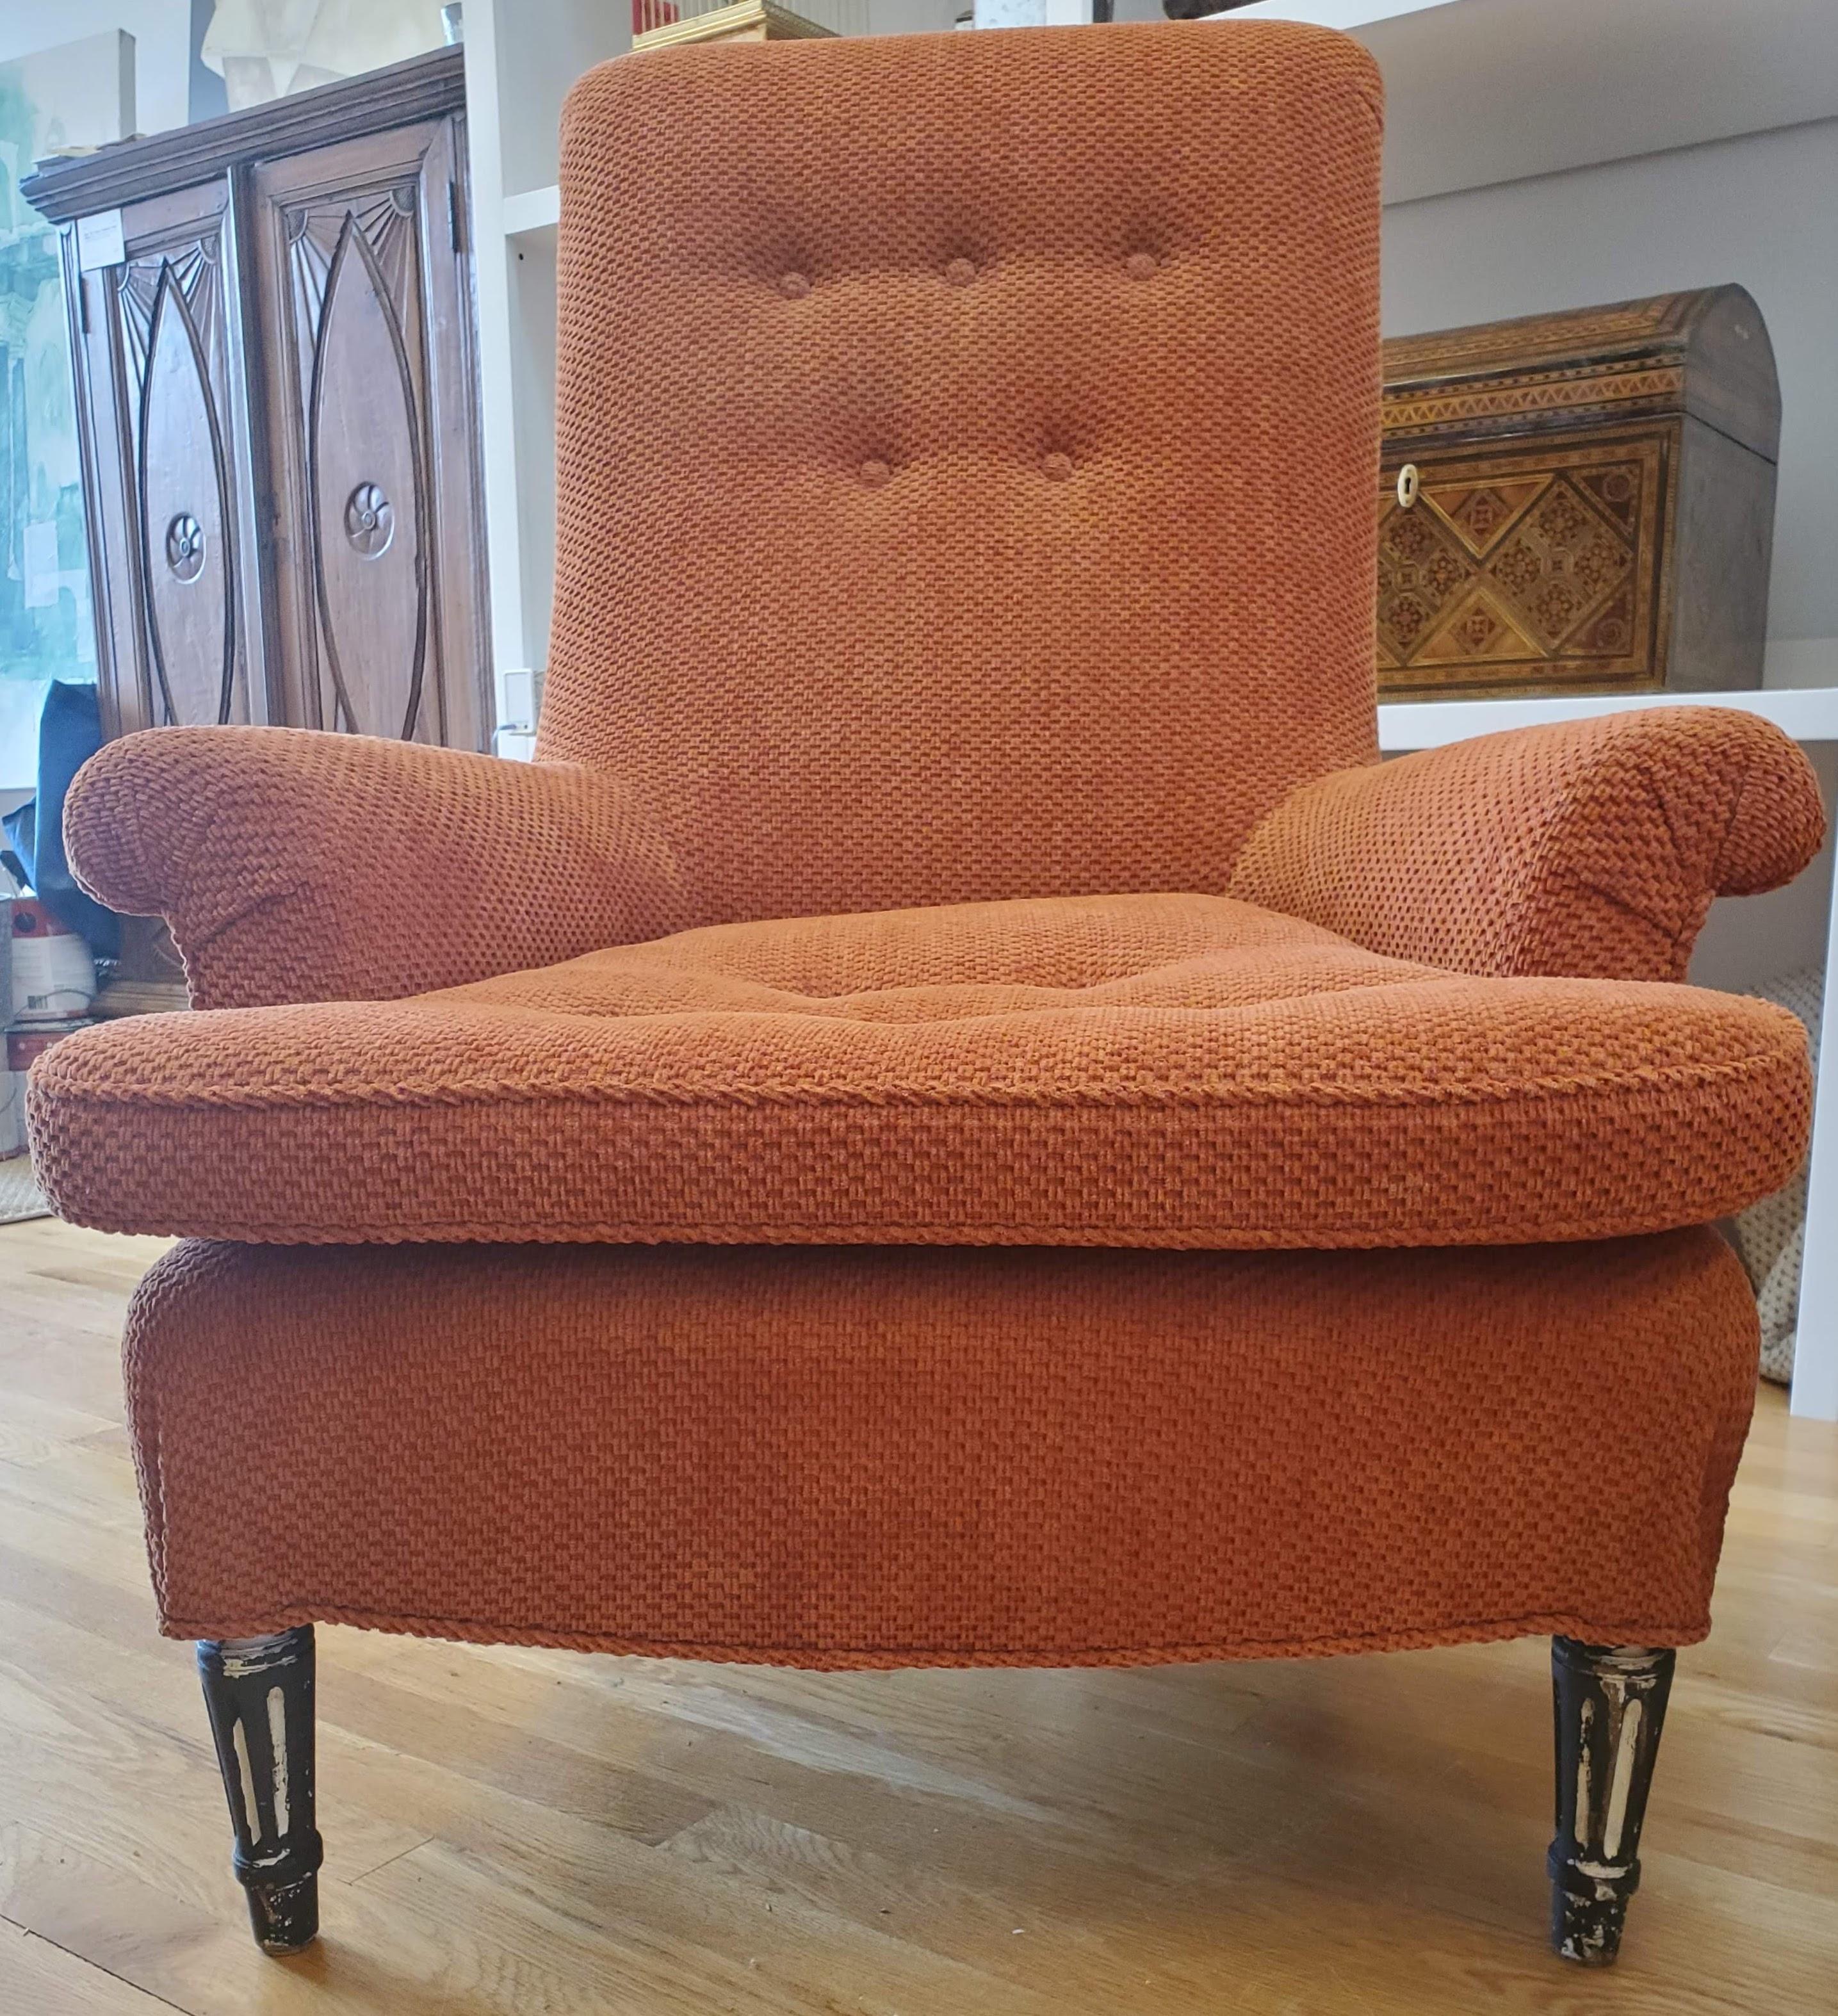 Pair of 19th Century English Club Chairs with Orange Chenille Upholstery For Sale 5